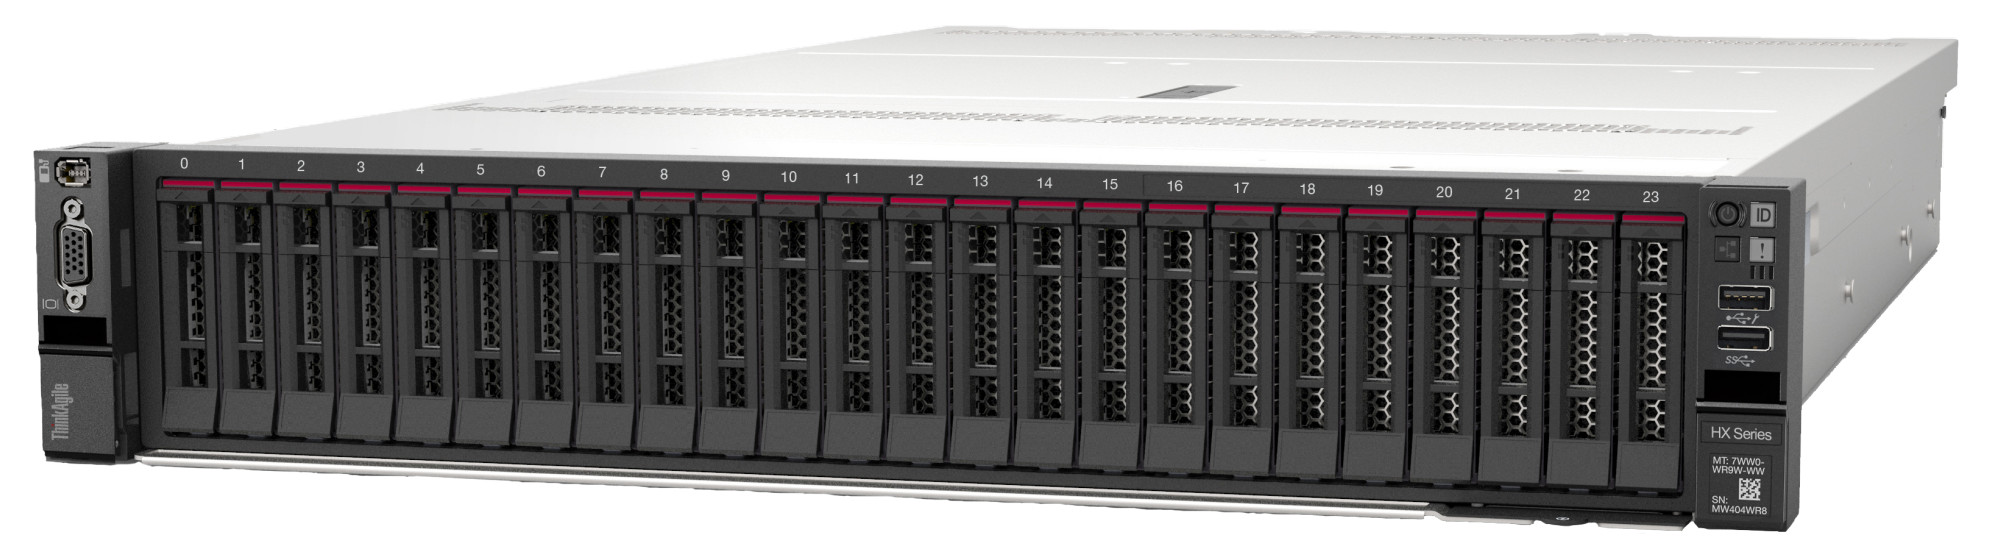 Lenovo ThinkAgile HX650 V3 2U Integrated Systems & Certified Nodes with 2.5-inch drive bays